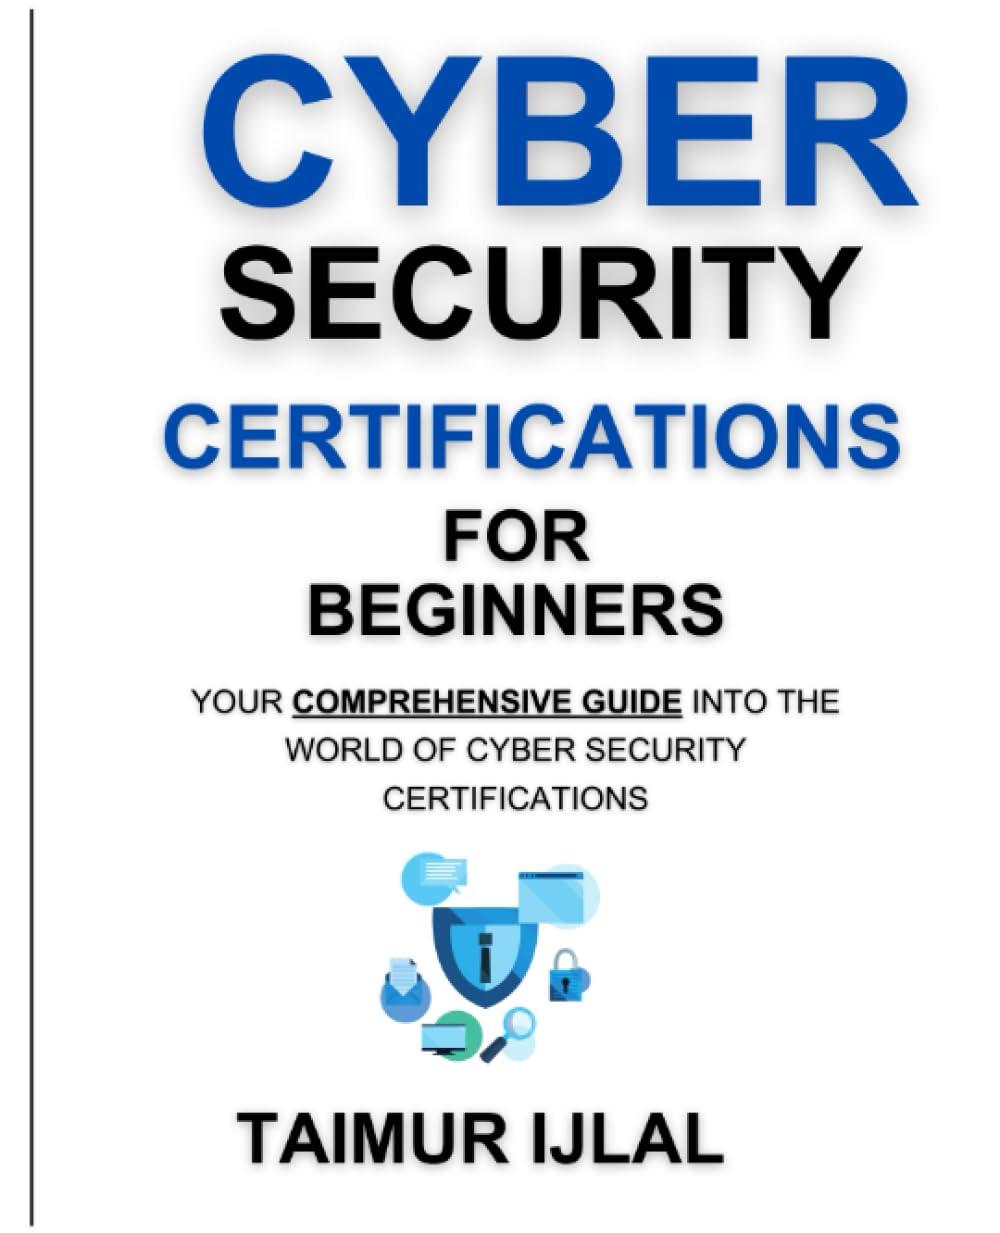 cybersecurity certifications for beginners your comprehensive guide into the world of cyber security